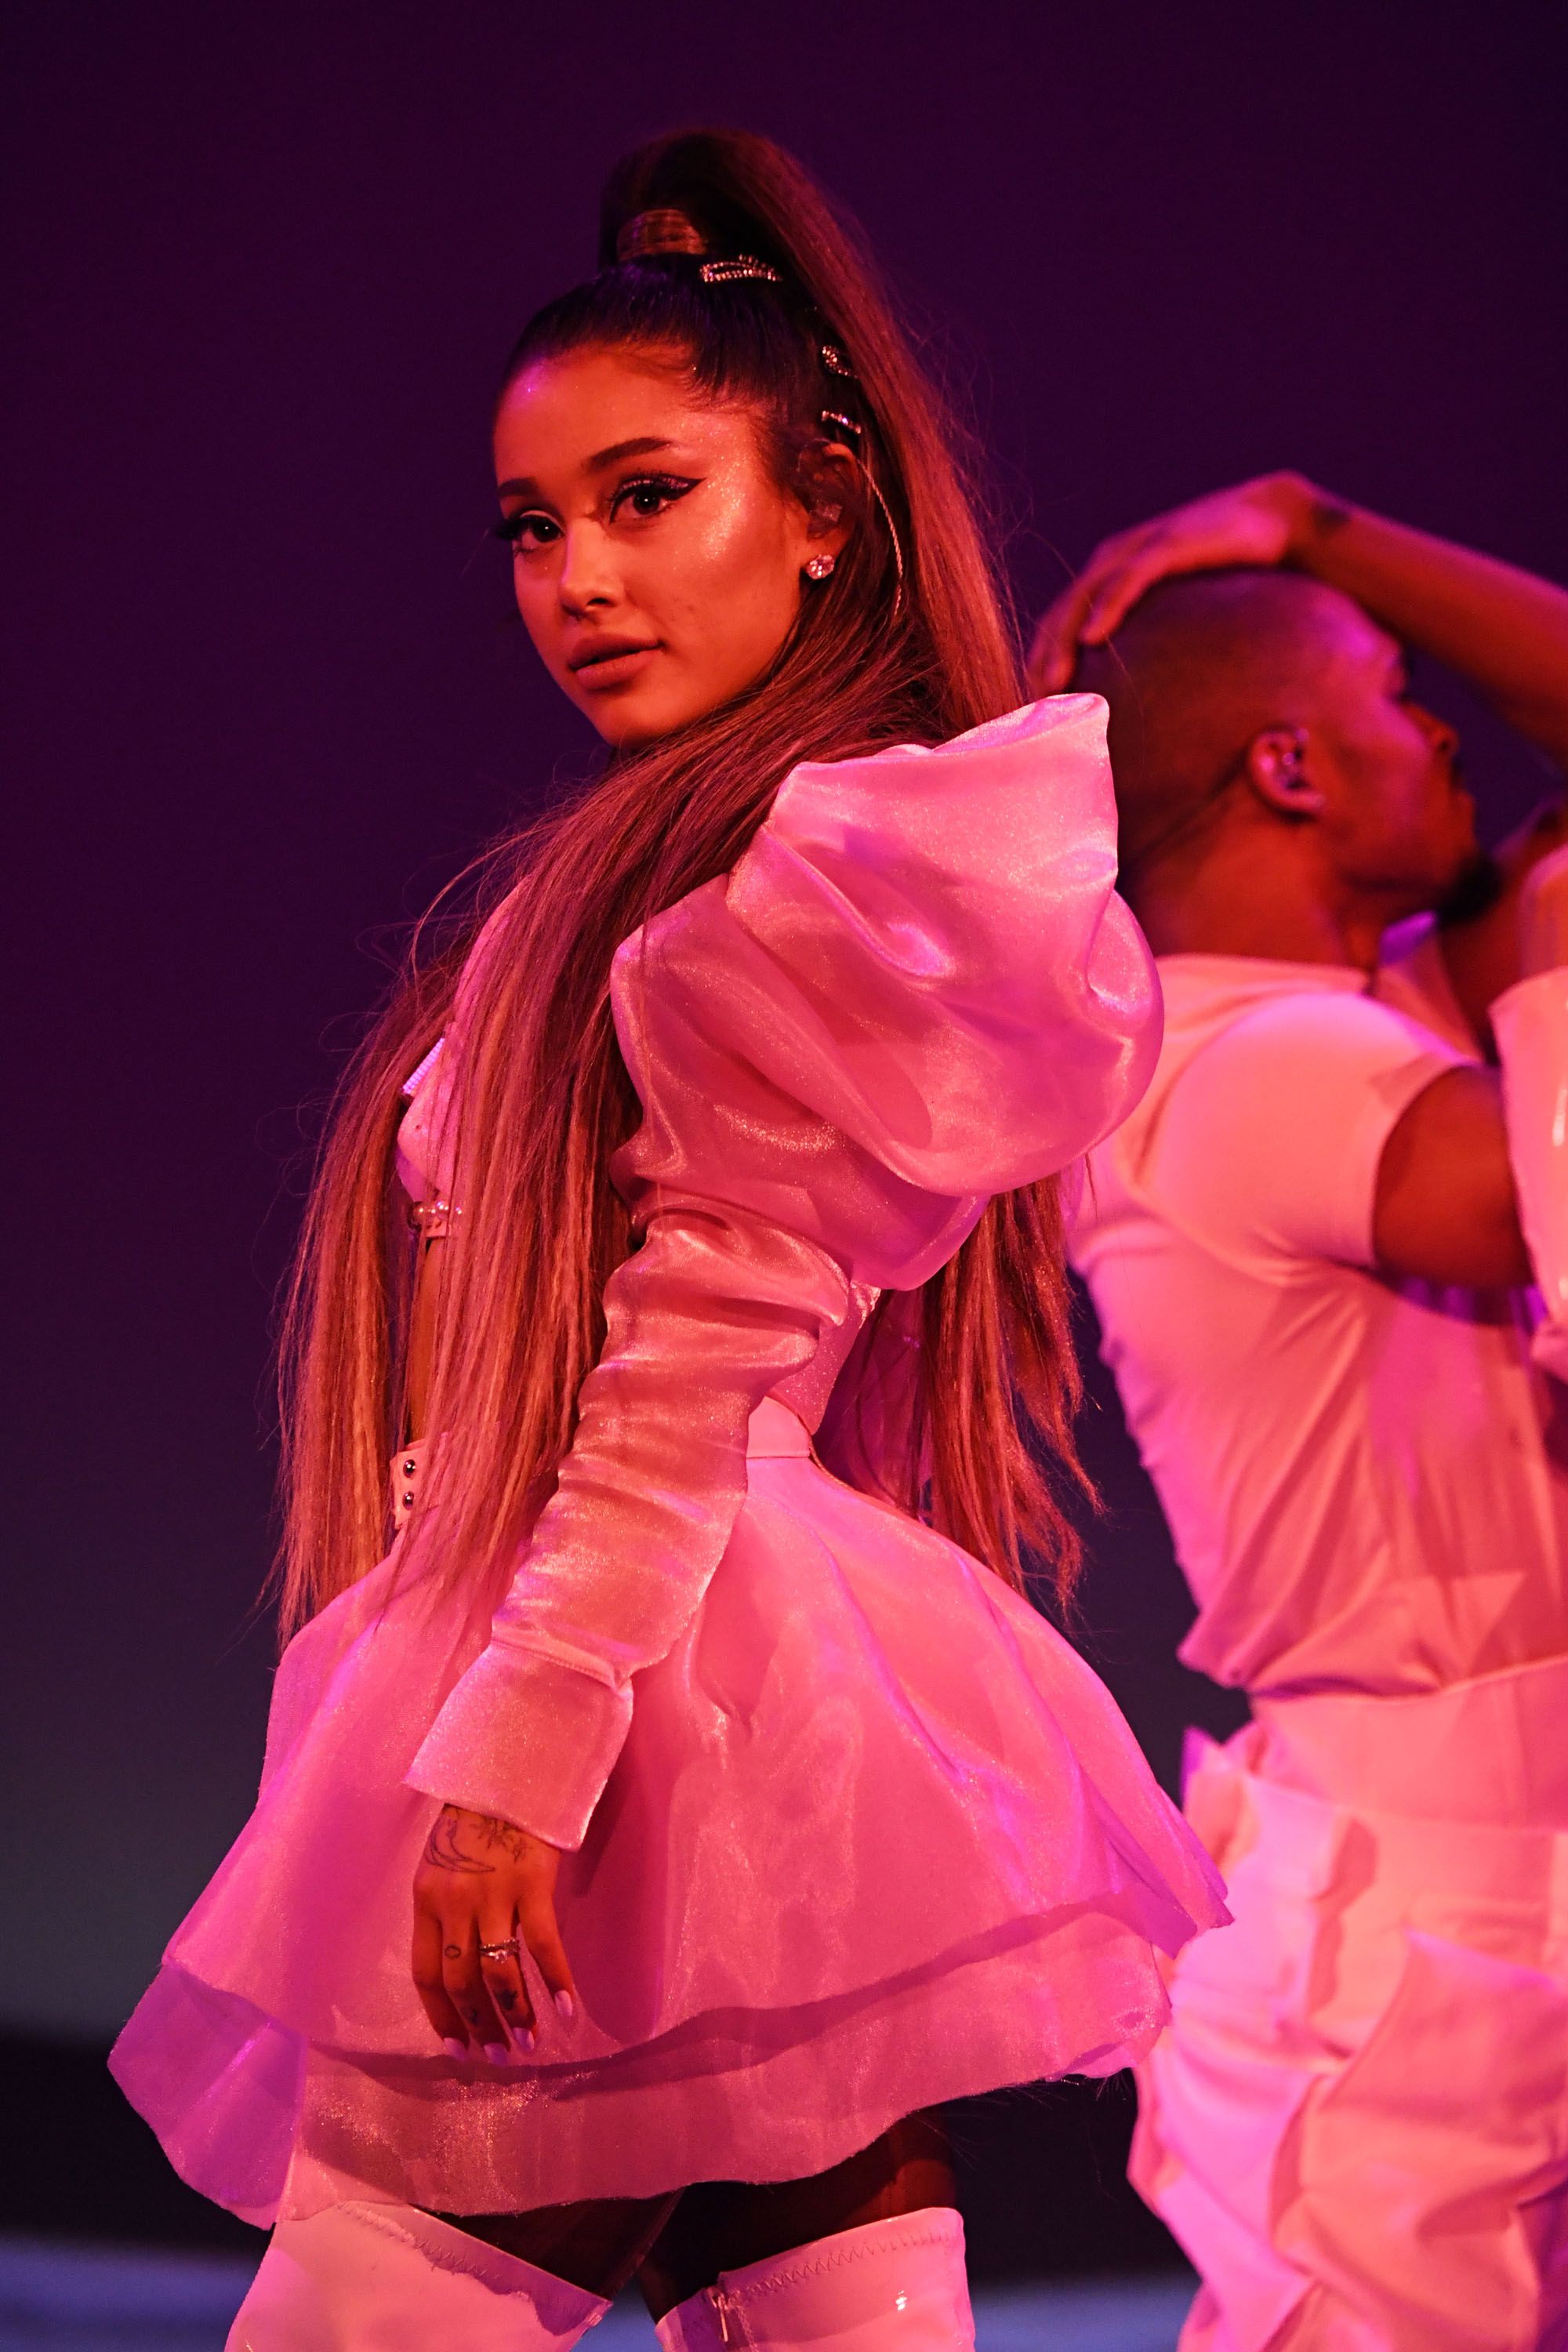 Break Up With Your Girlfriend Lyrics Decoded Ariana Grande Song Meaning